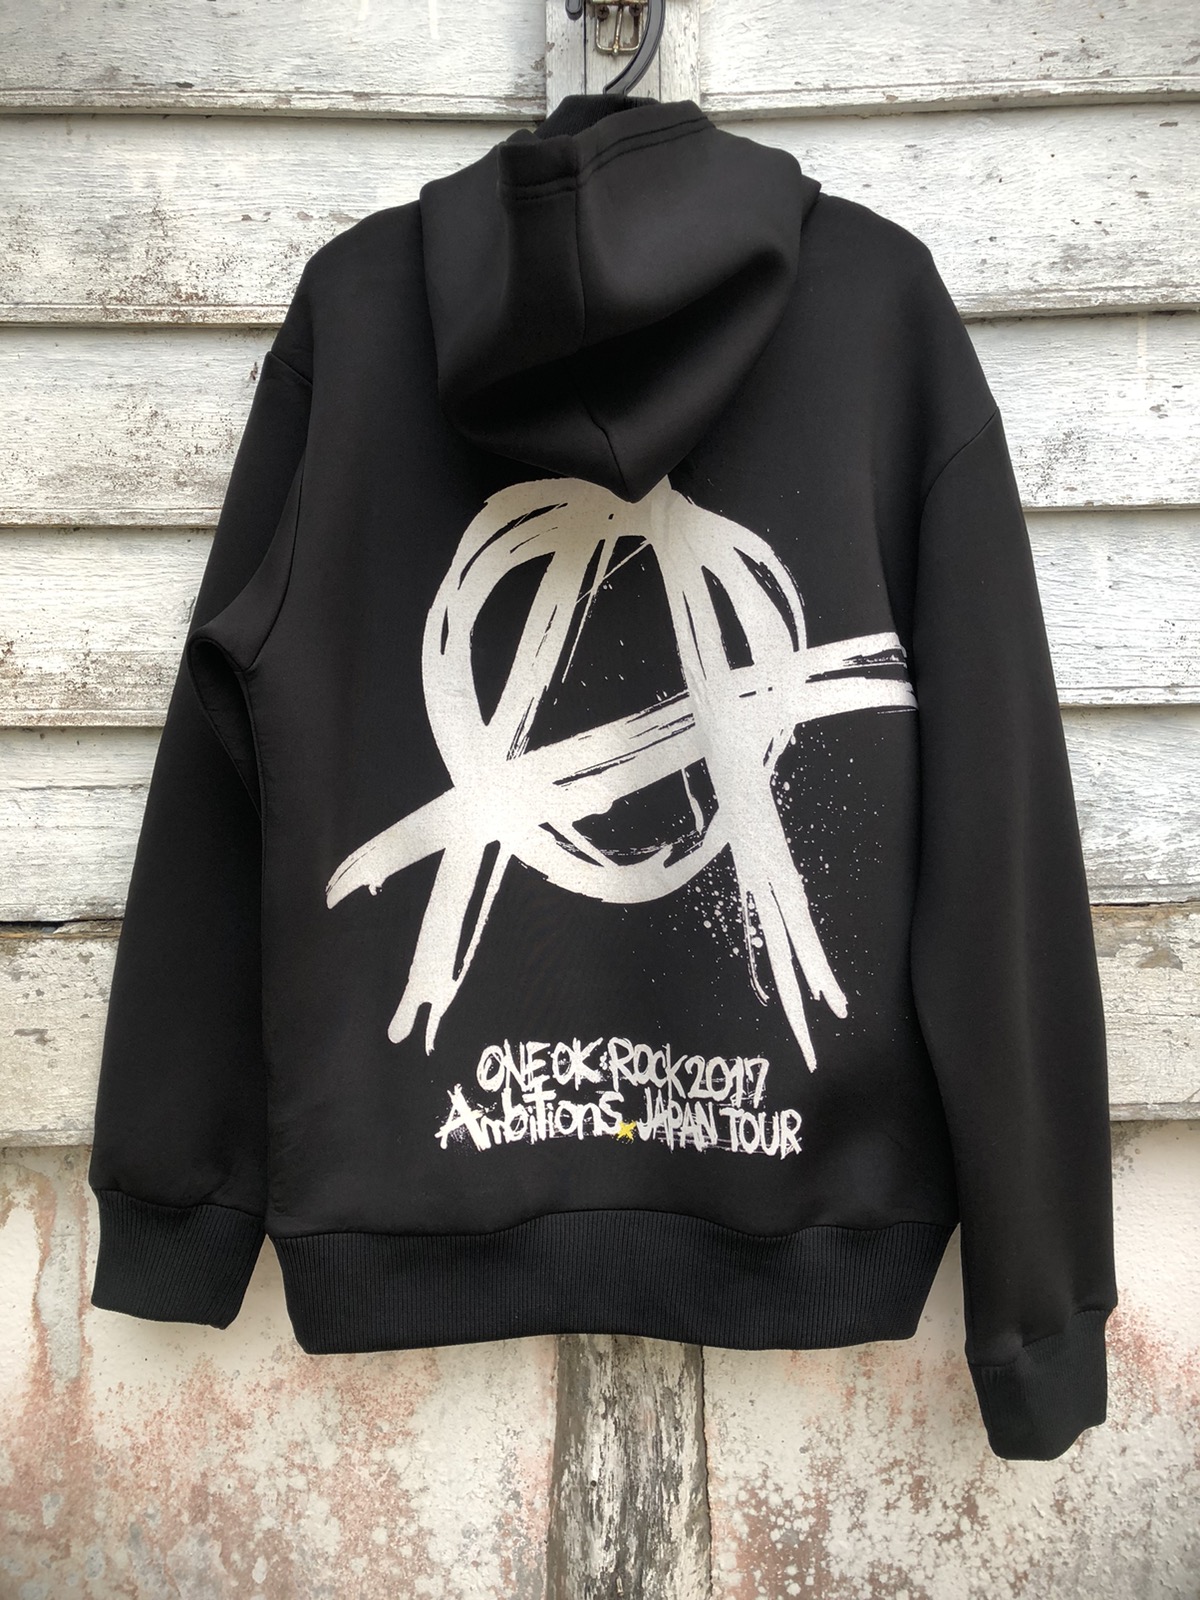 Other Designers Japanese Brand - ONE OK ROCK 2017 AMBITION TOUR